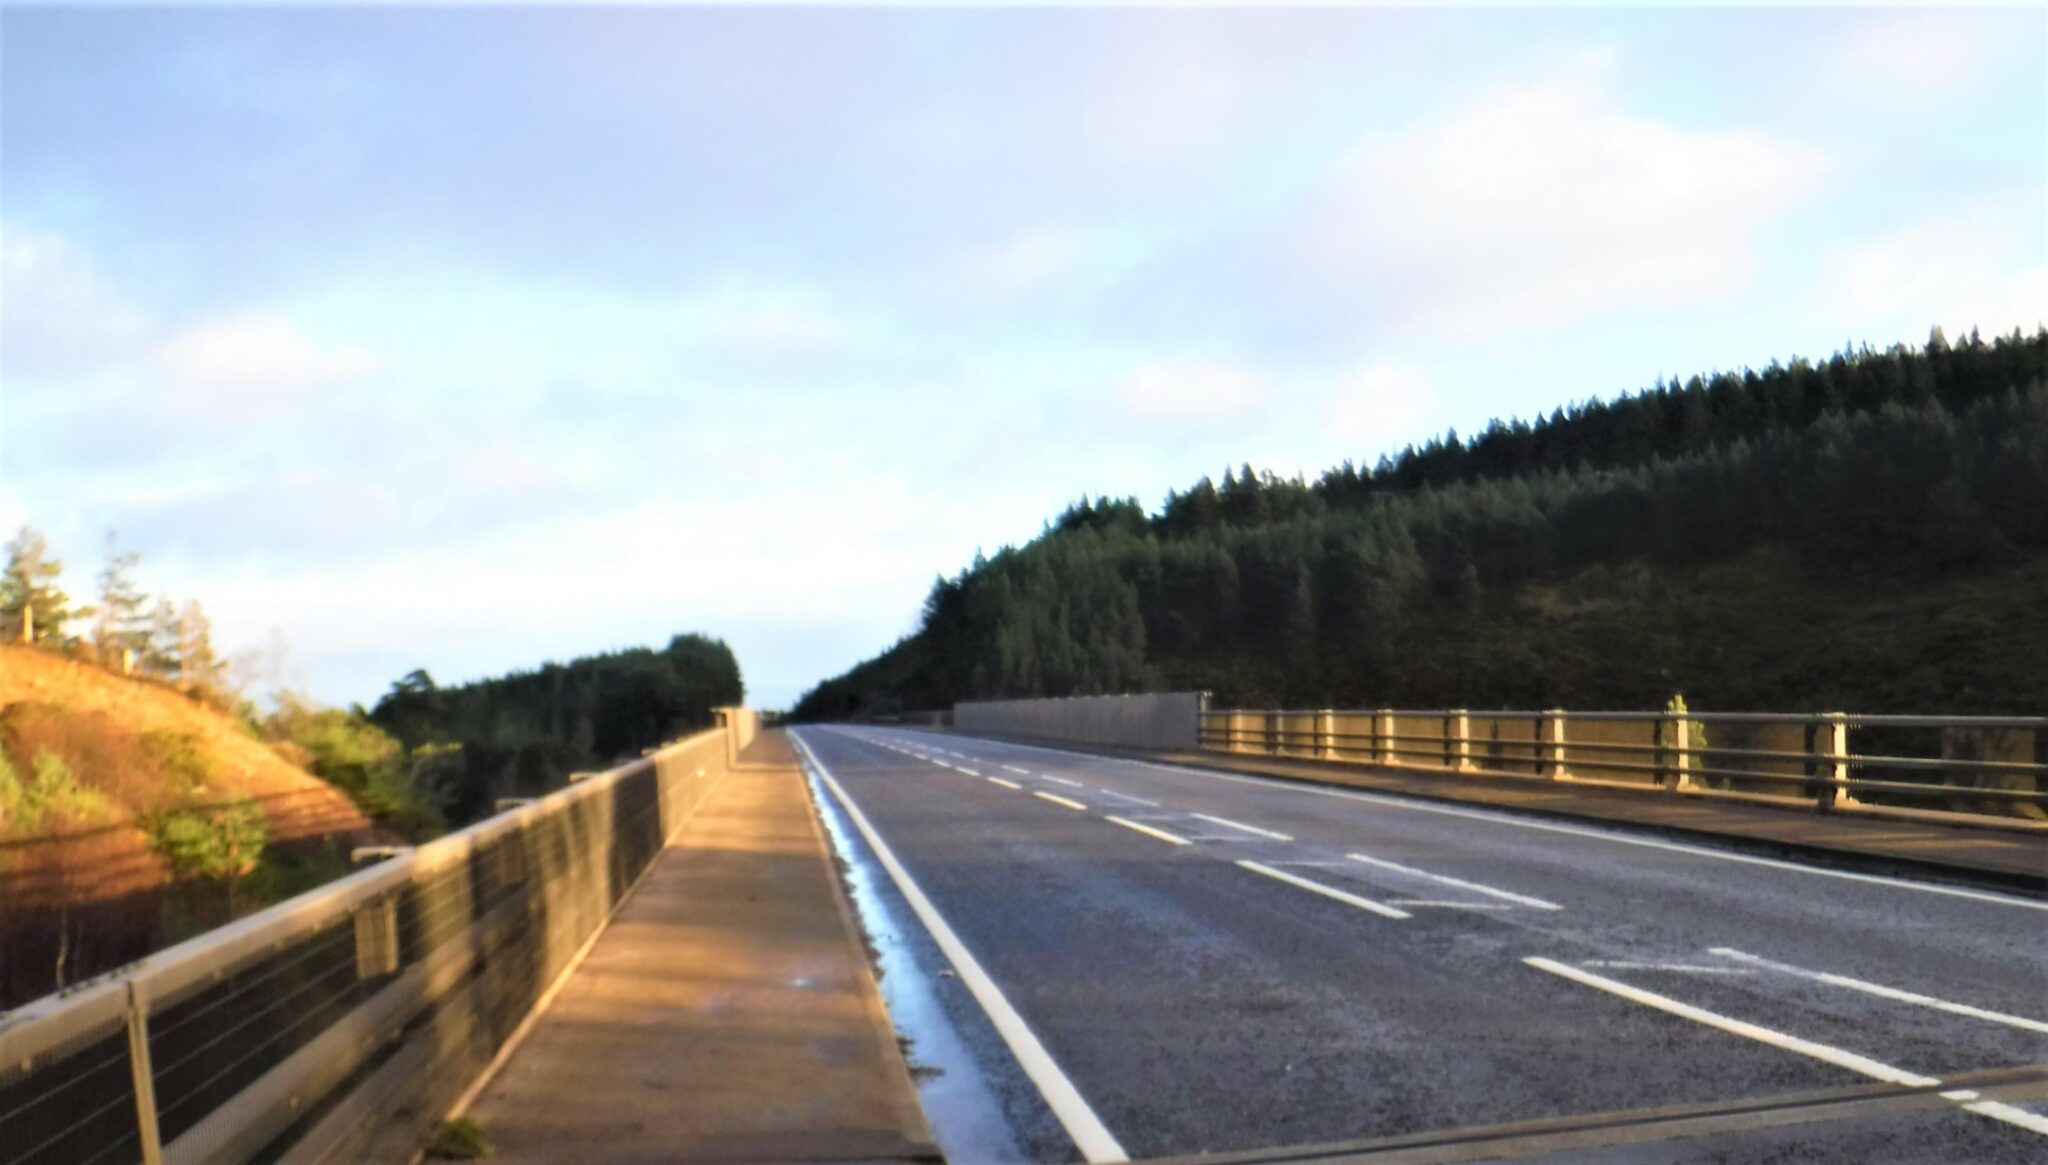 ESSENTIAL BRIDGE JOINT REPAIRS FOR A9 NORTH OF CARRBRIDGE